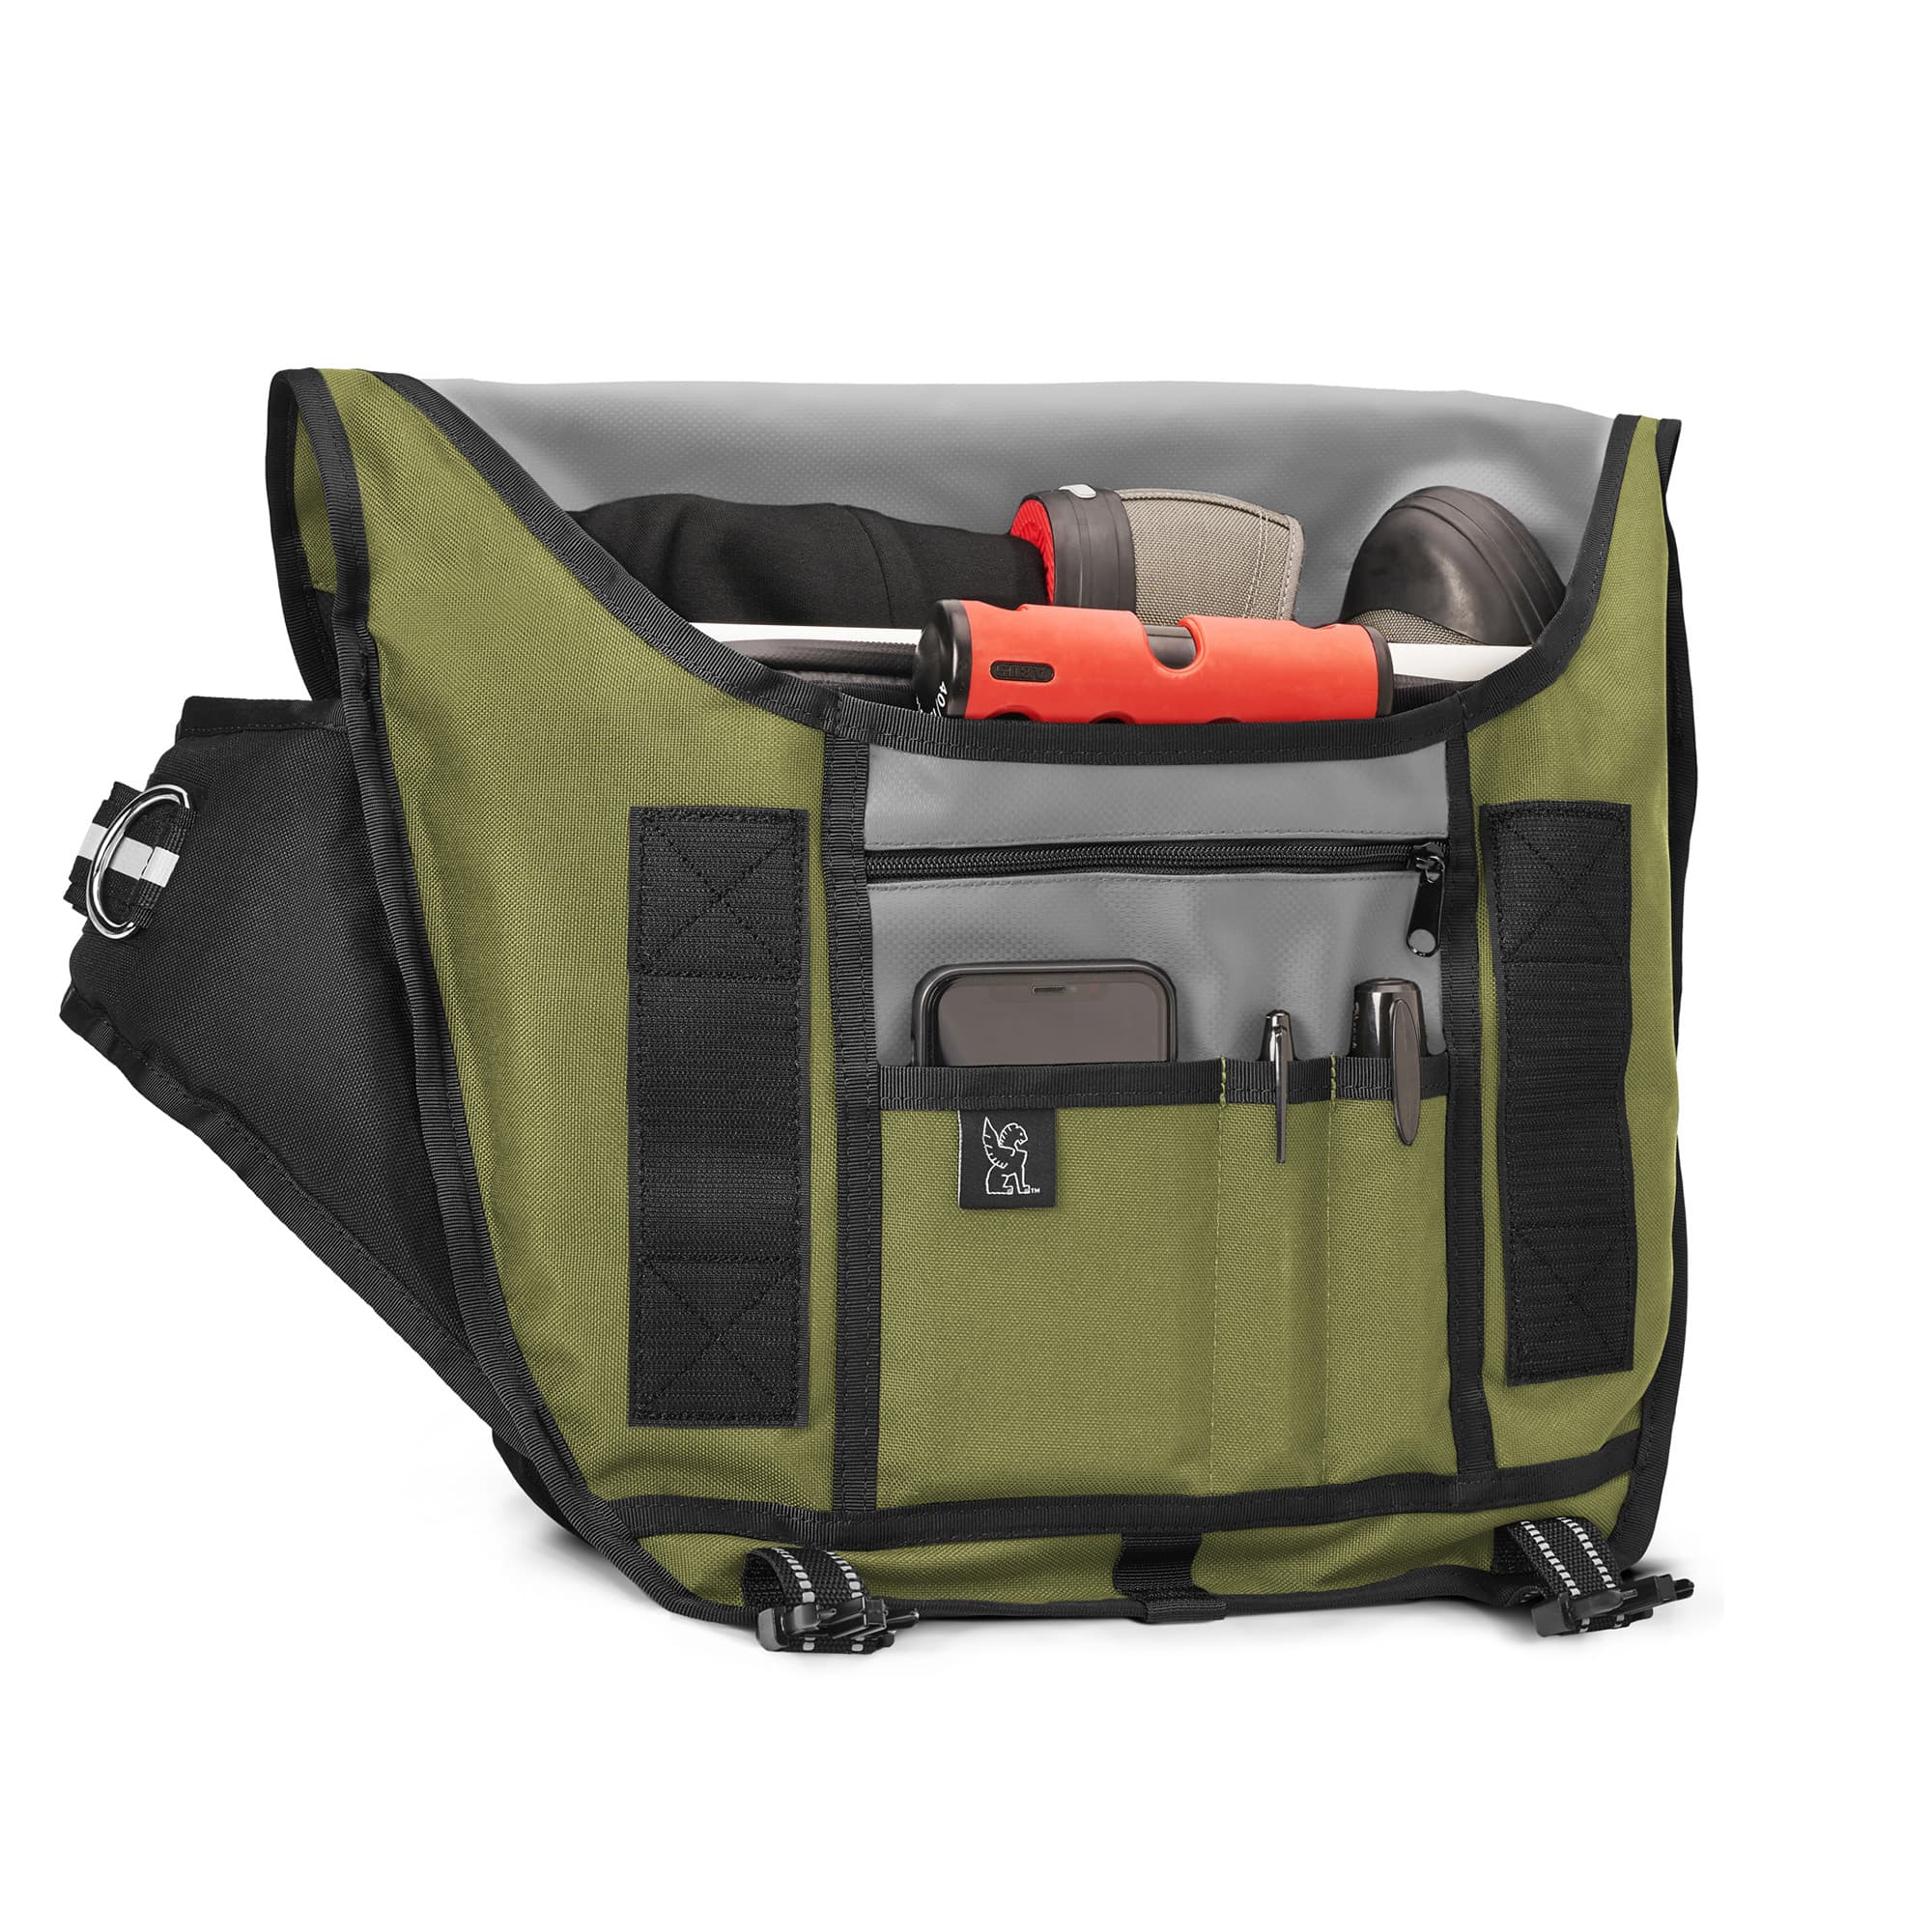 Mini Metro Messenger in green inside build out #color_olive branch